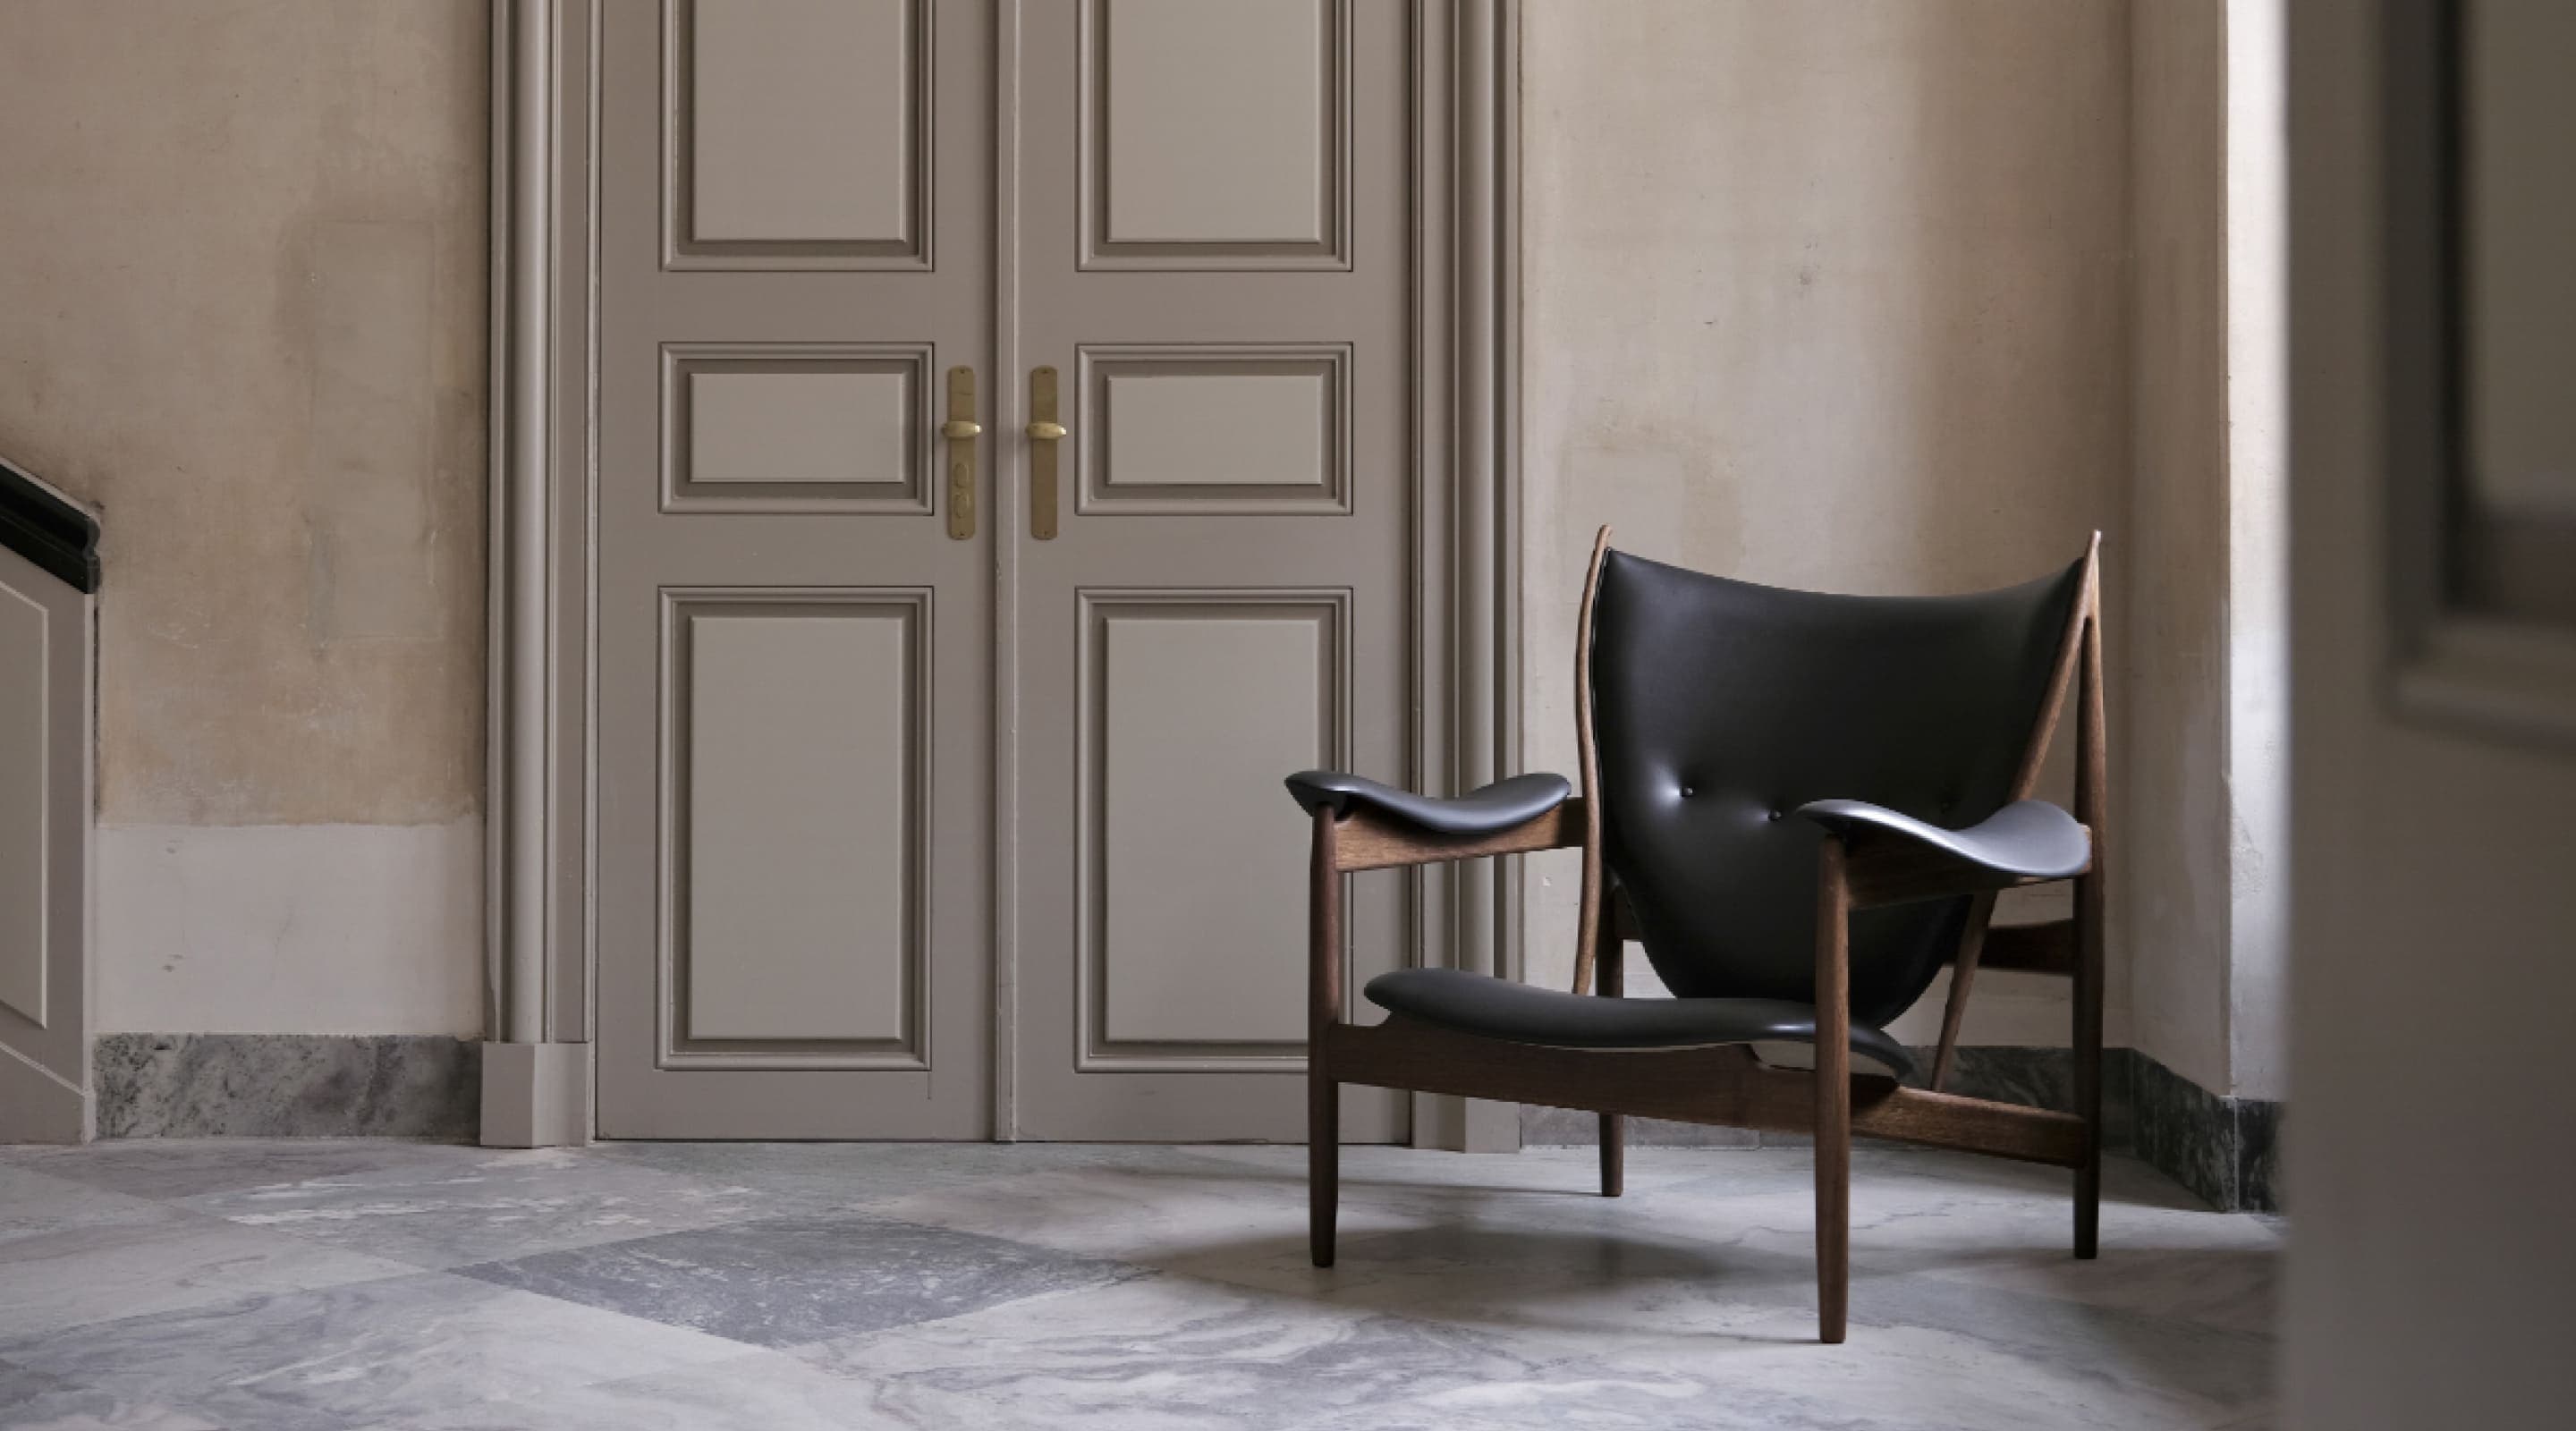 Exclusive limited edition of the Chieftain Chair, meticulously crafted in smoked oak